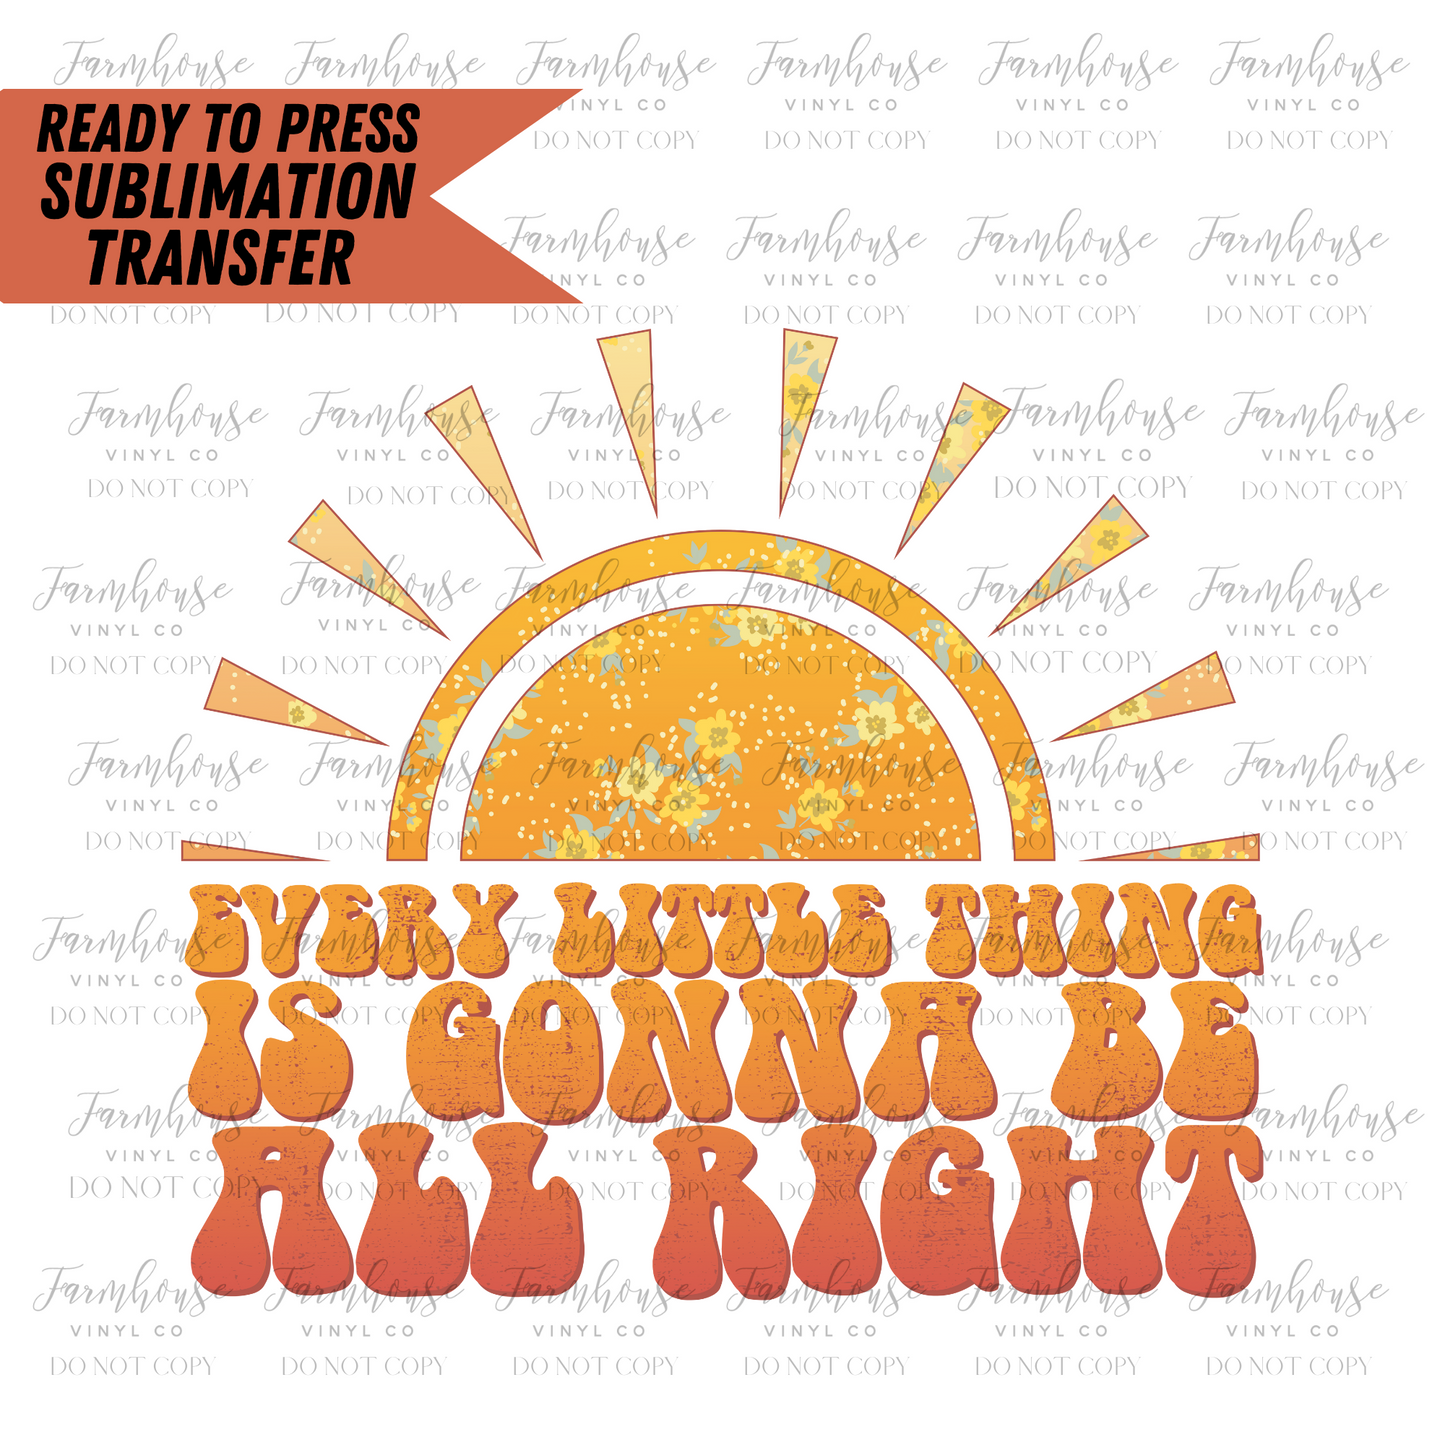 Every Little Thing Is Gonna Be All Right Ready To Press Sublimation Transfer Design - Farmhouse Vinyl Co